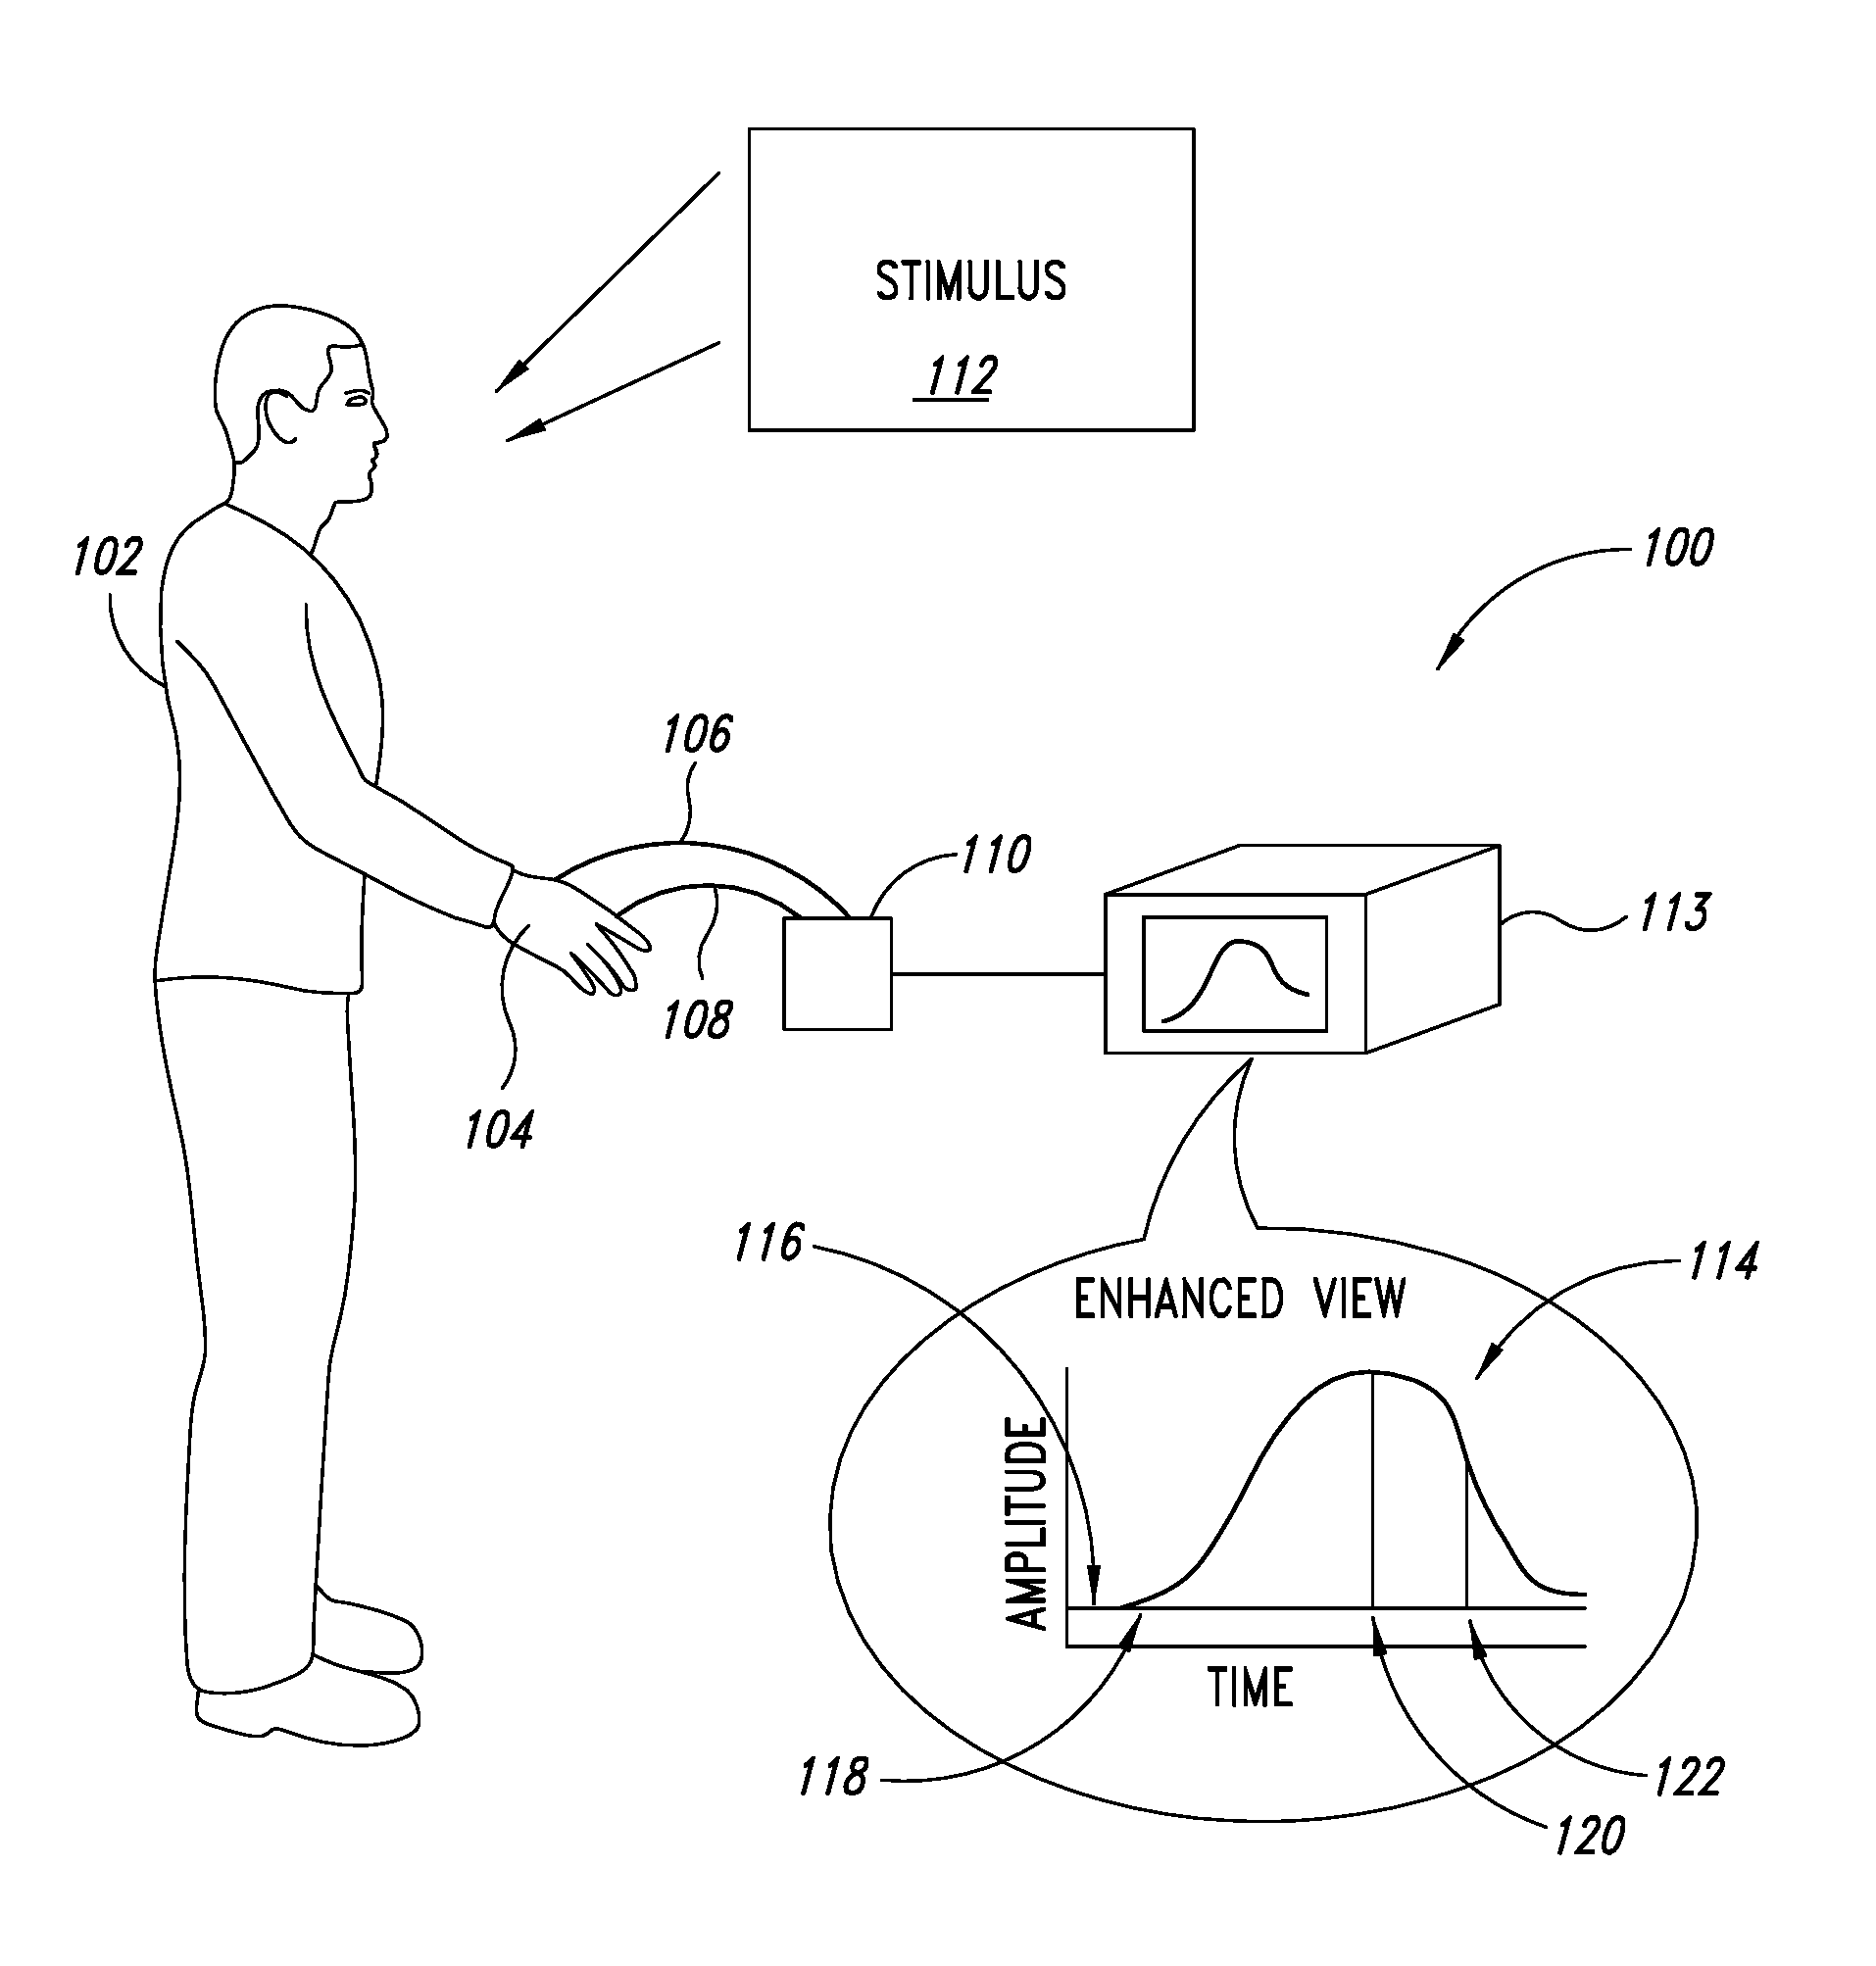 Biofeedback for a gaming device, such as an electronic gaming machine (EGM)